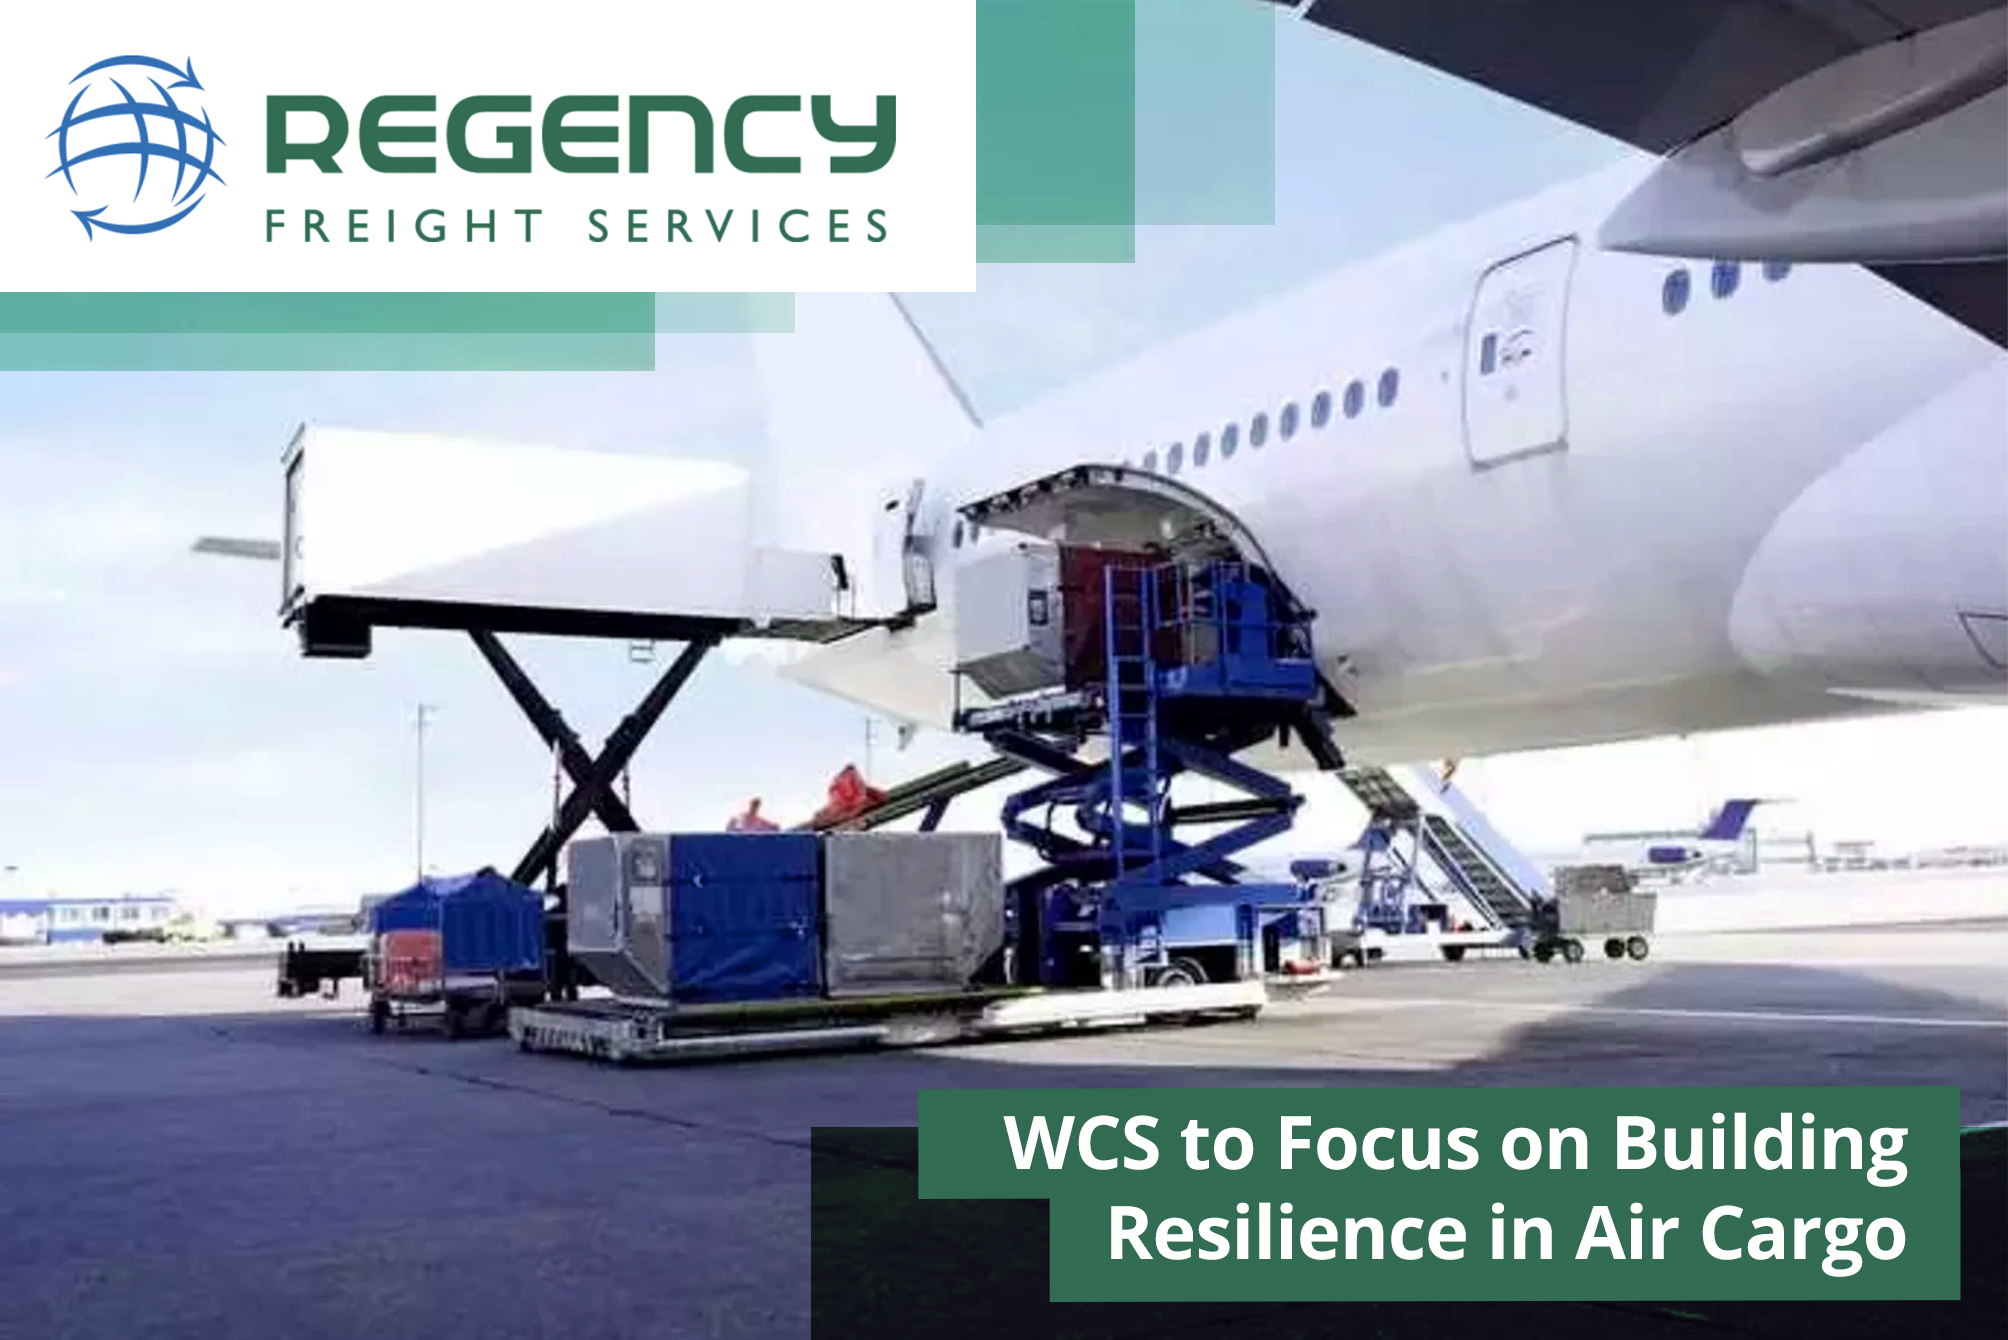 WCS to Focus on Building Resilience in Air Cargo